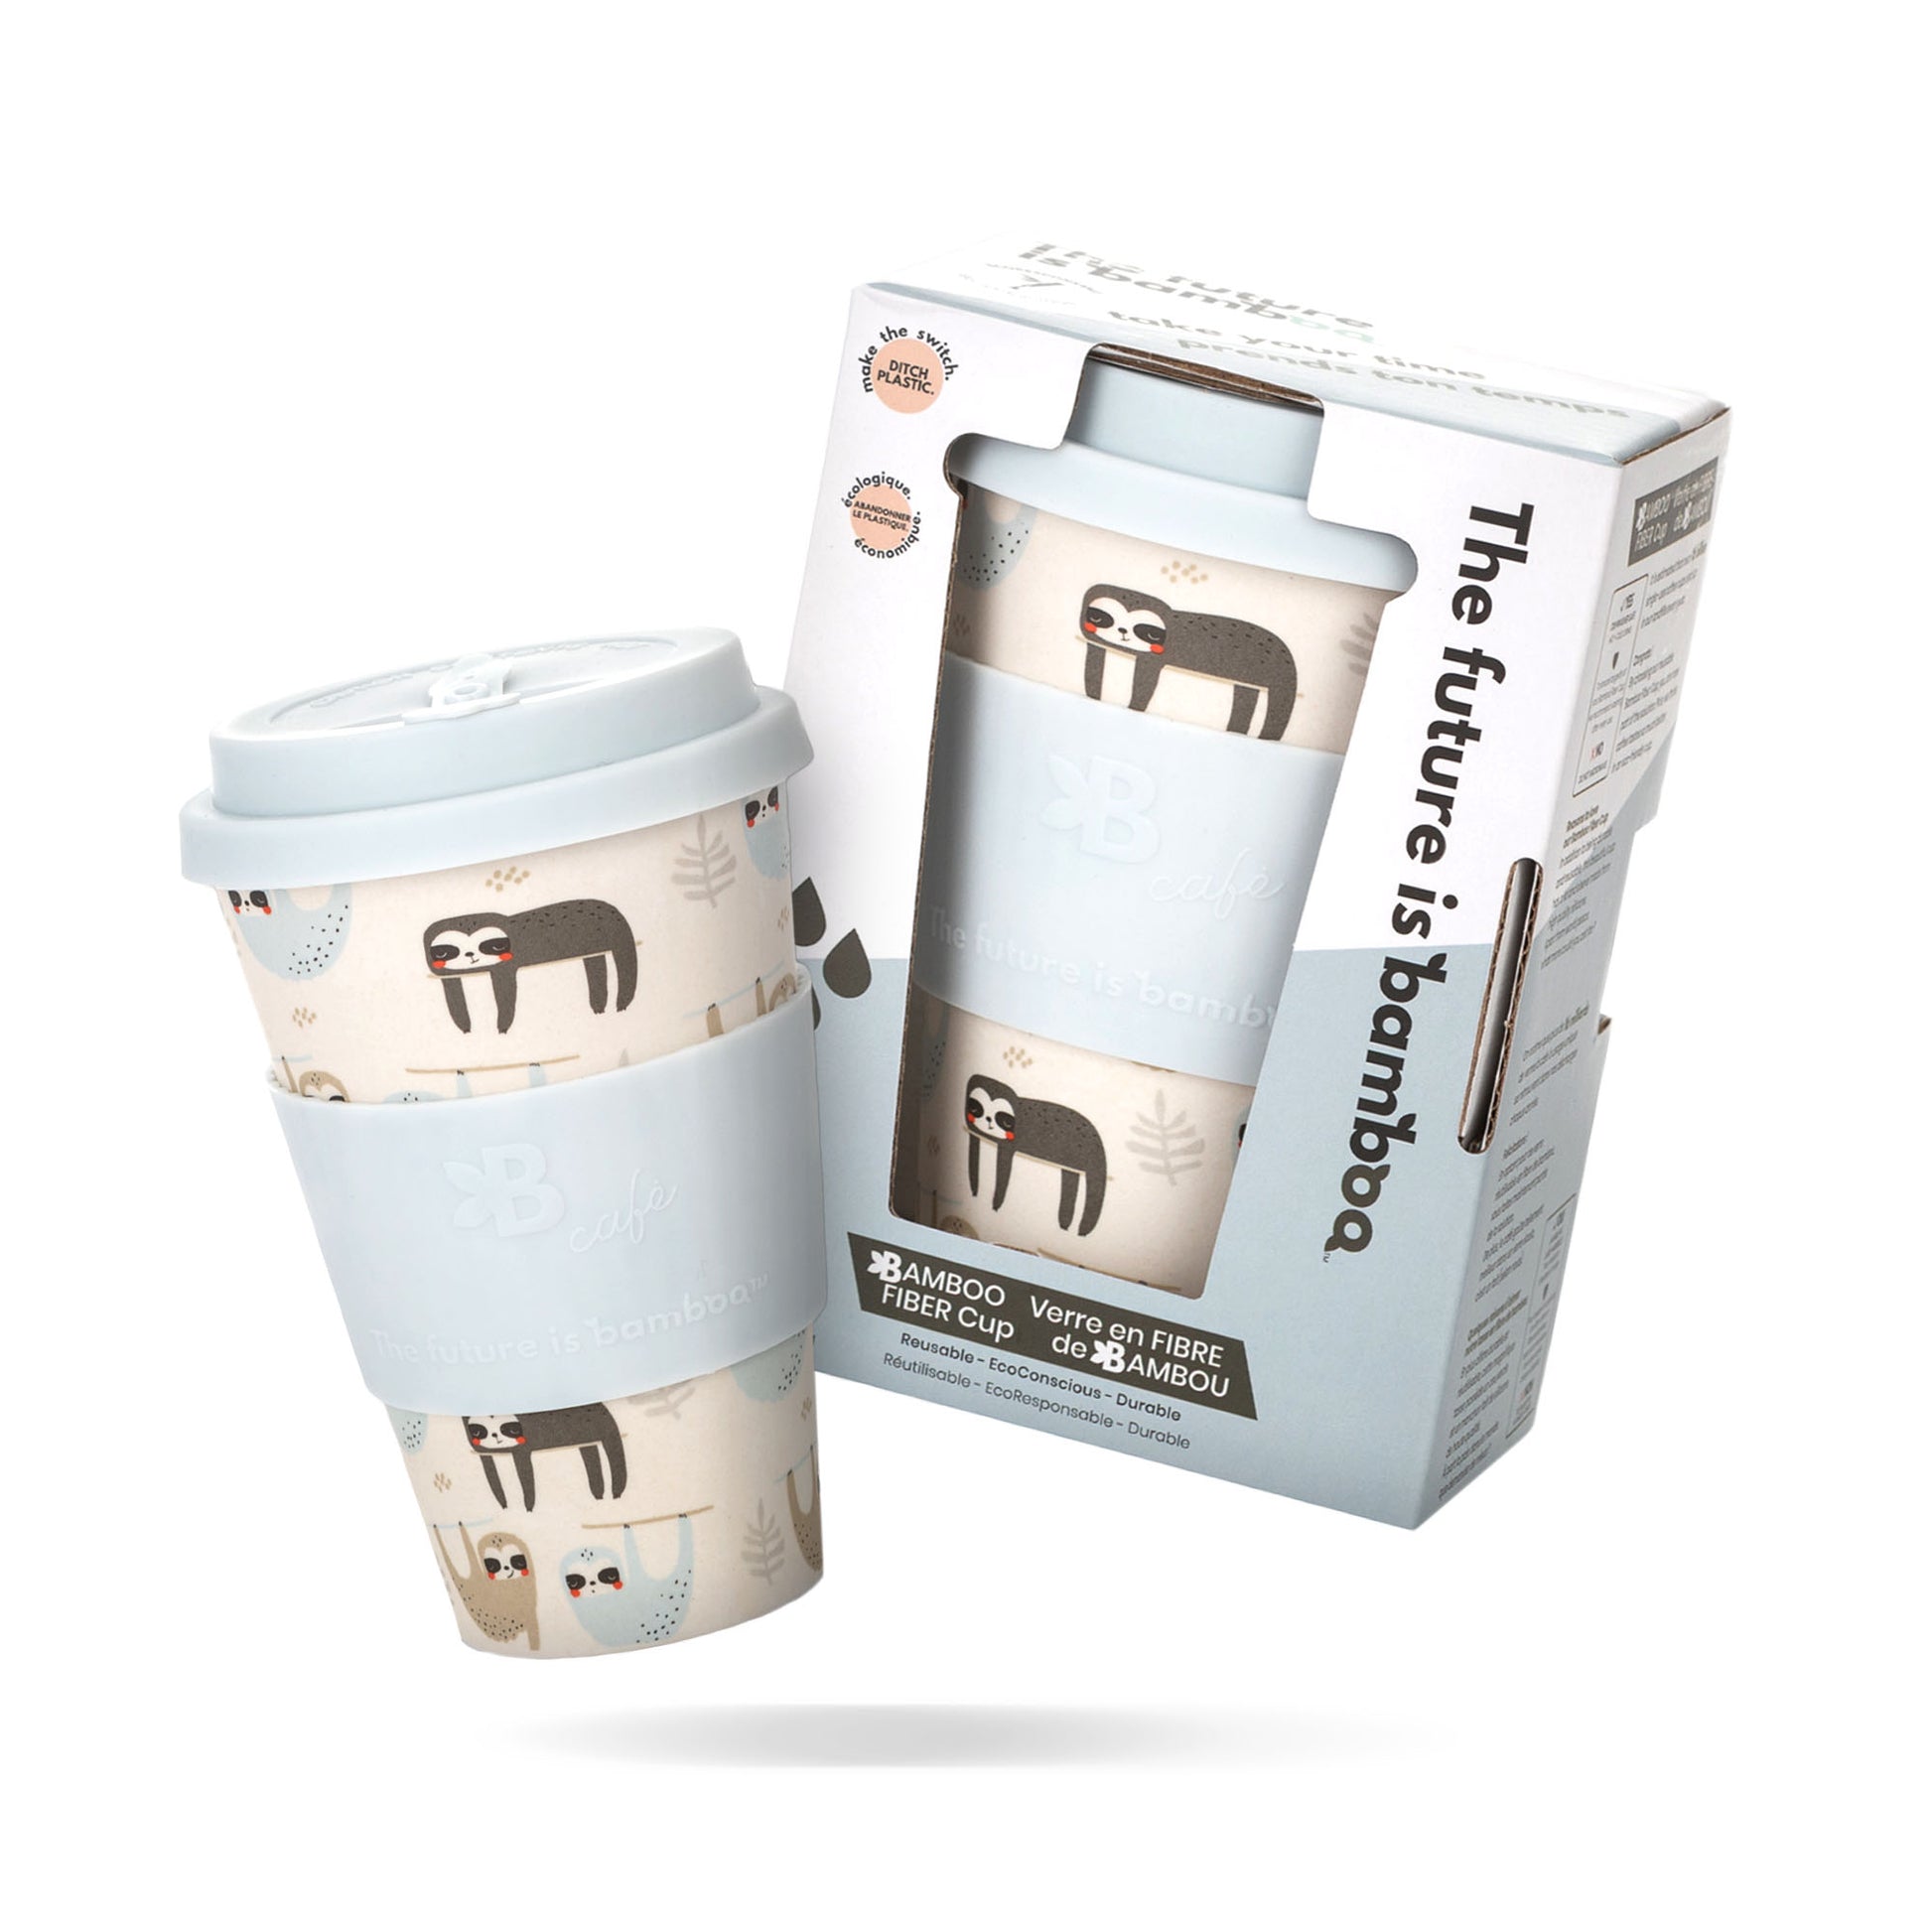 Bamboo Fiber Cup - Take Your Time - The Future is Bamboo 